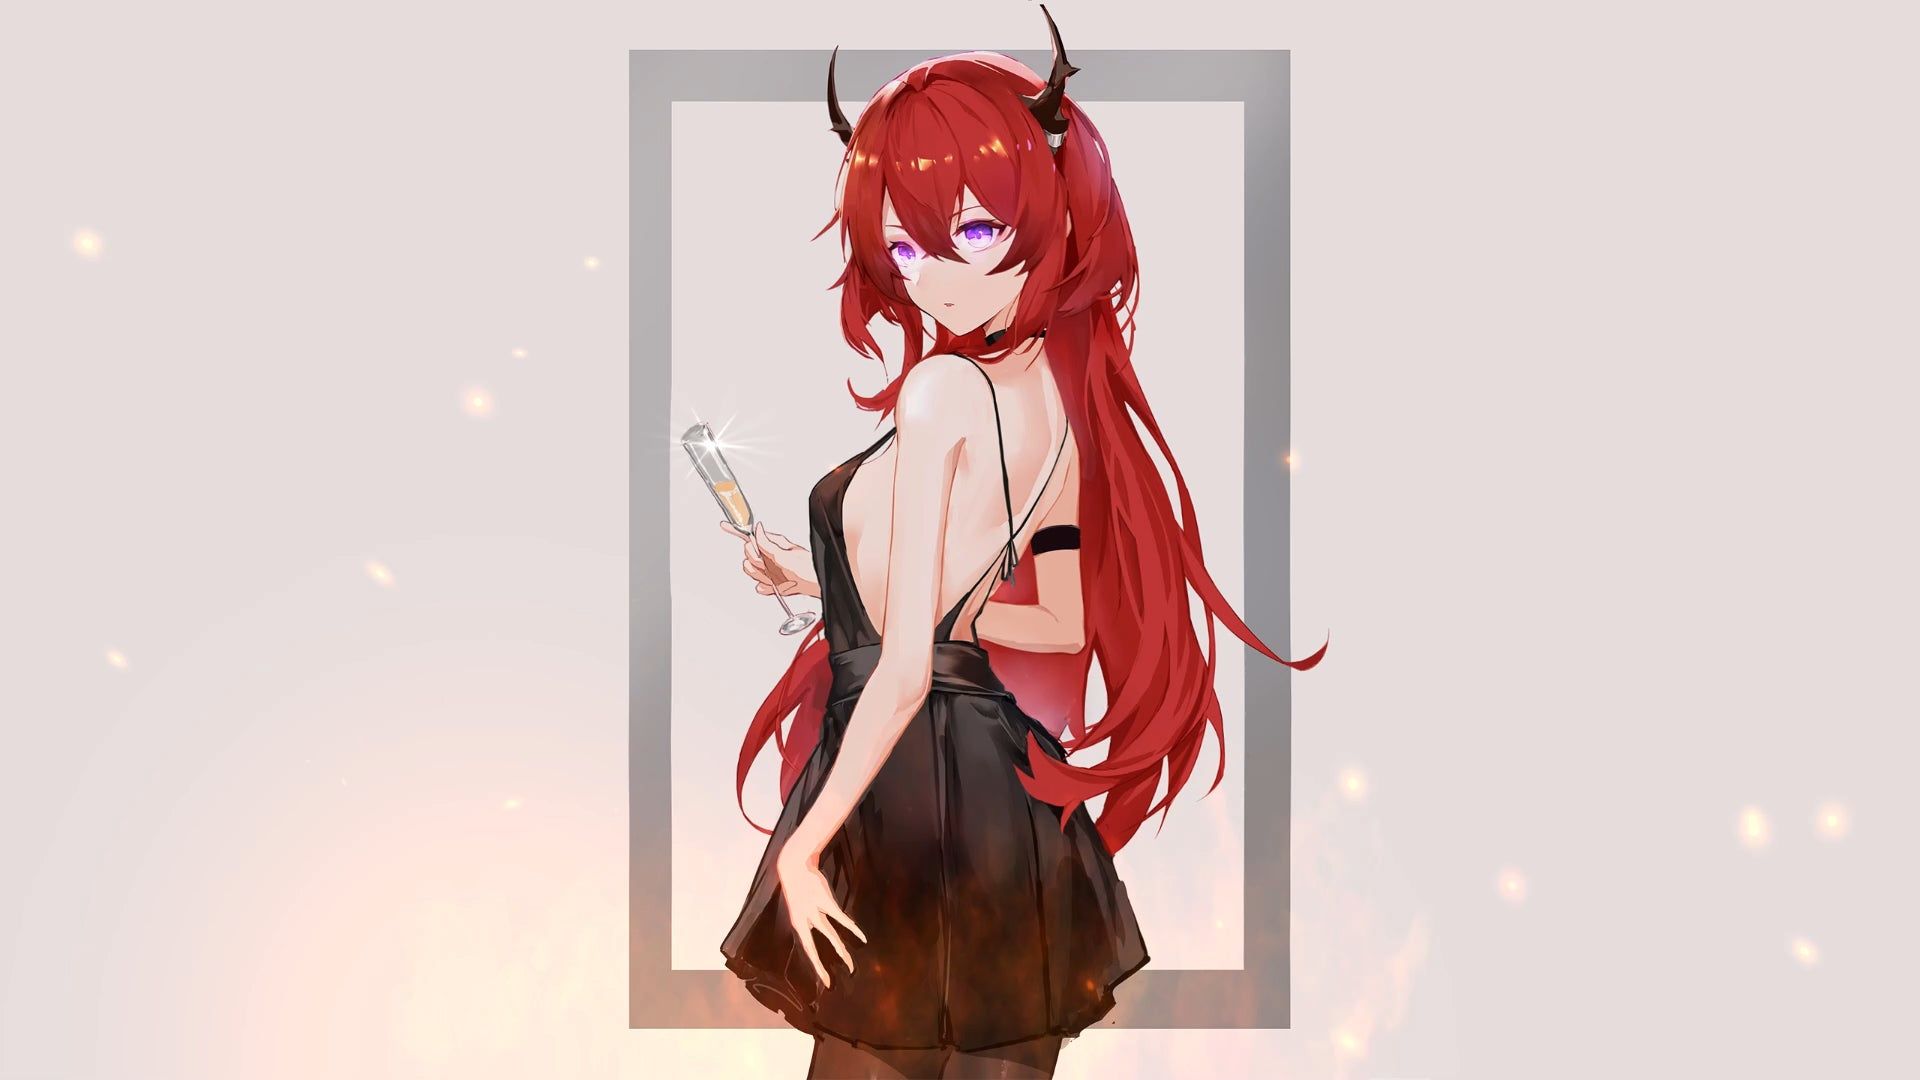 Just created a Live Wallpaper for Surtr in a Party Dress!